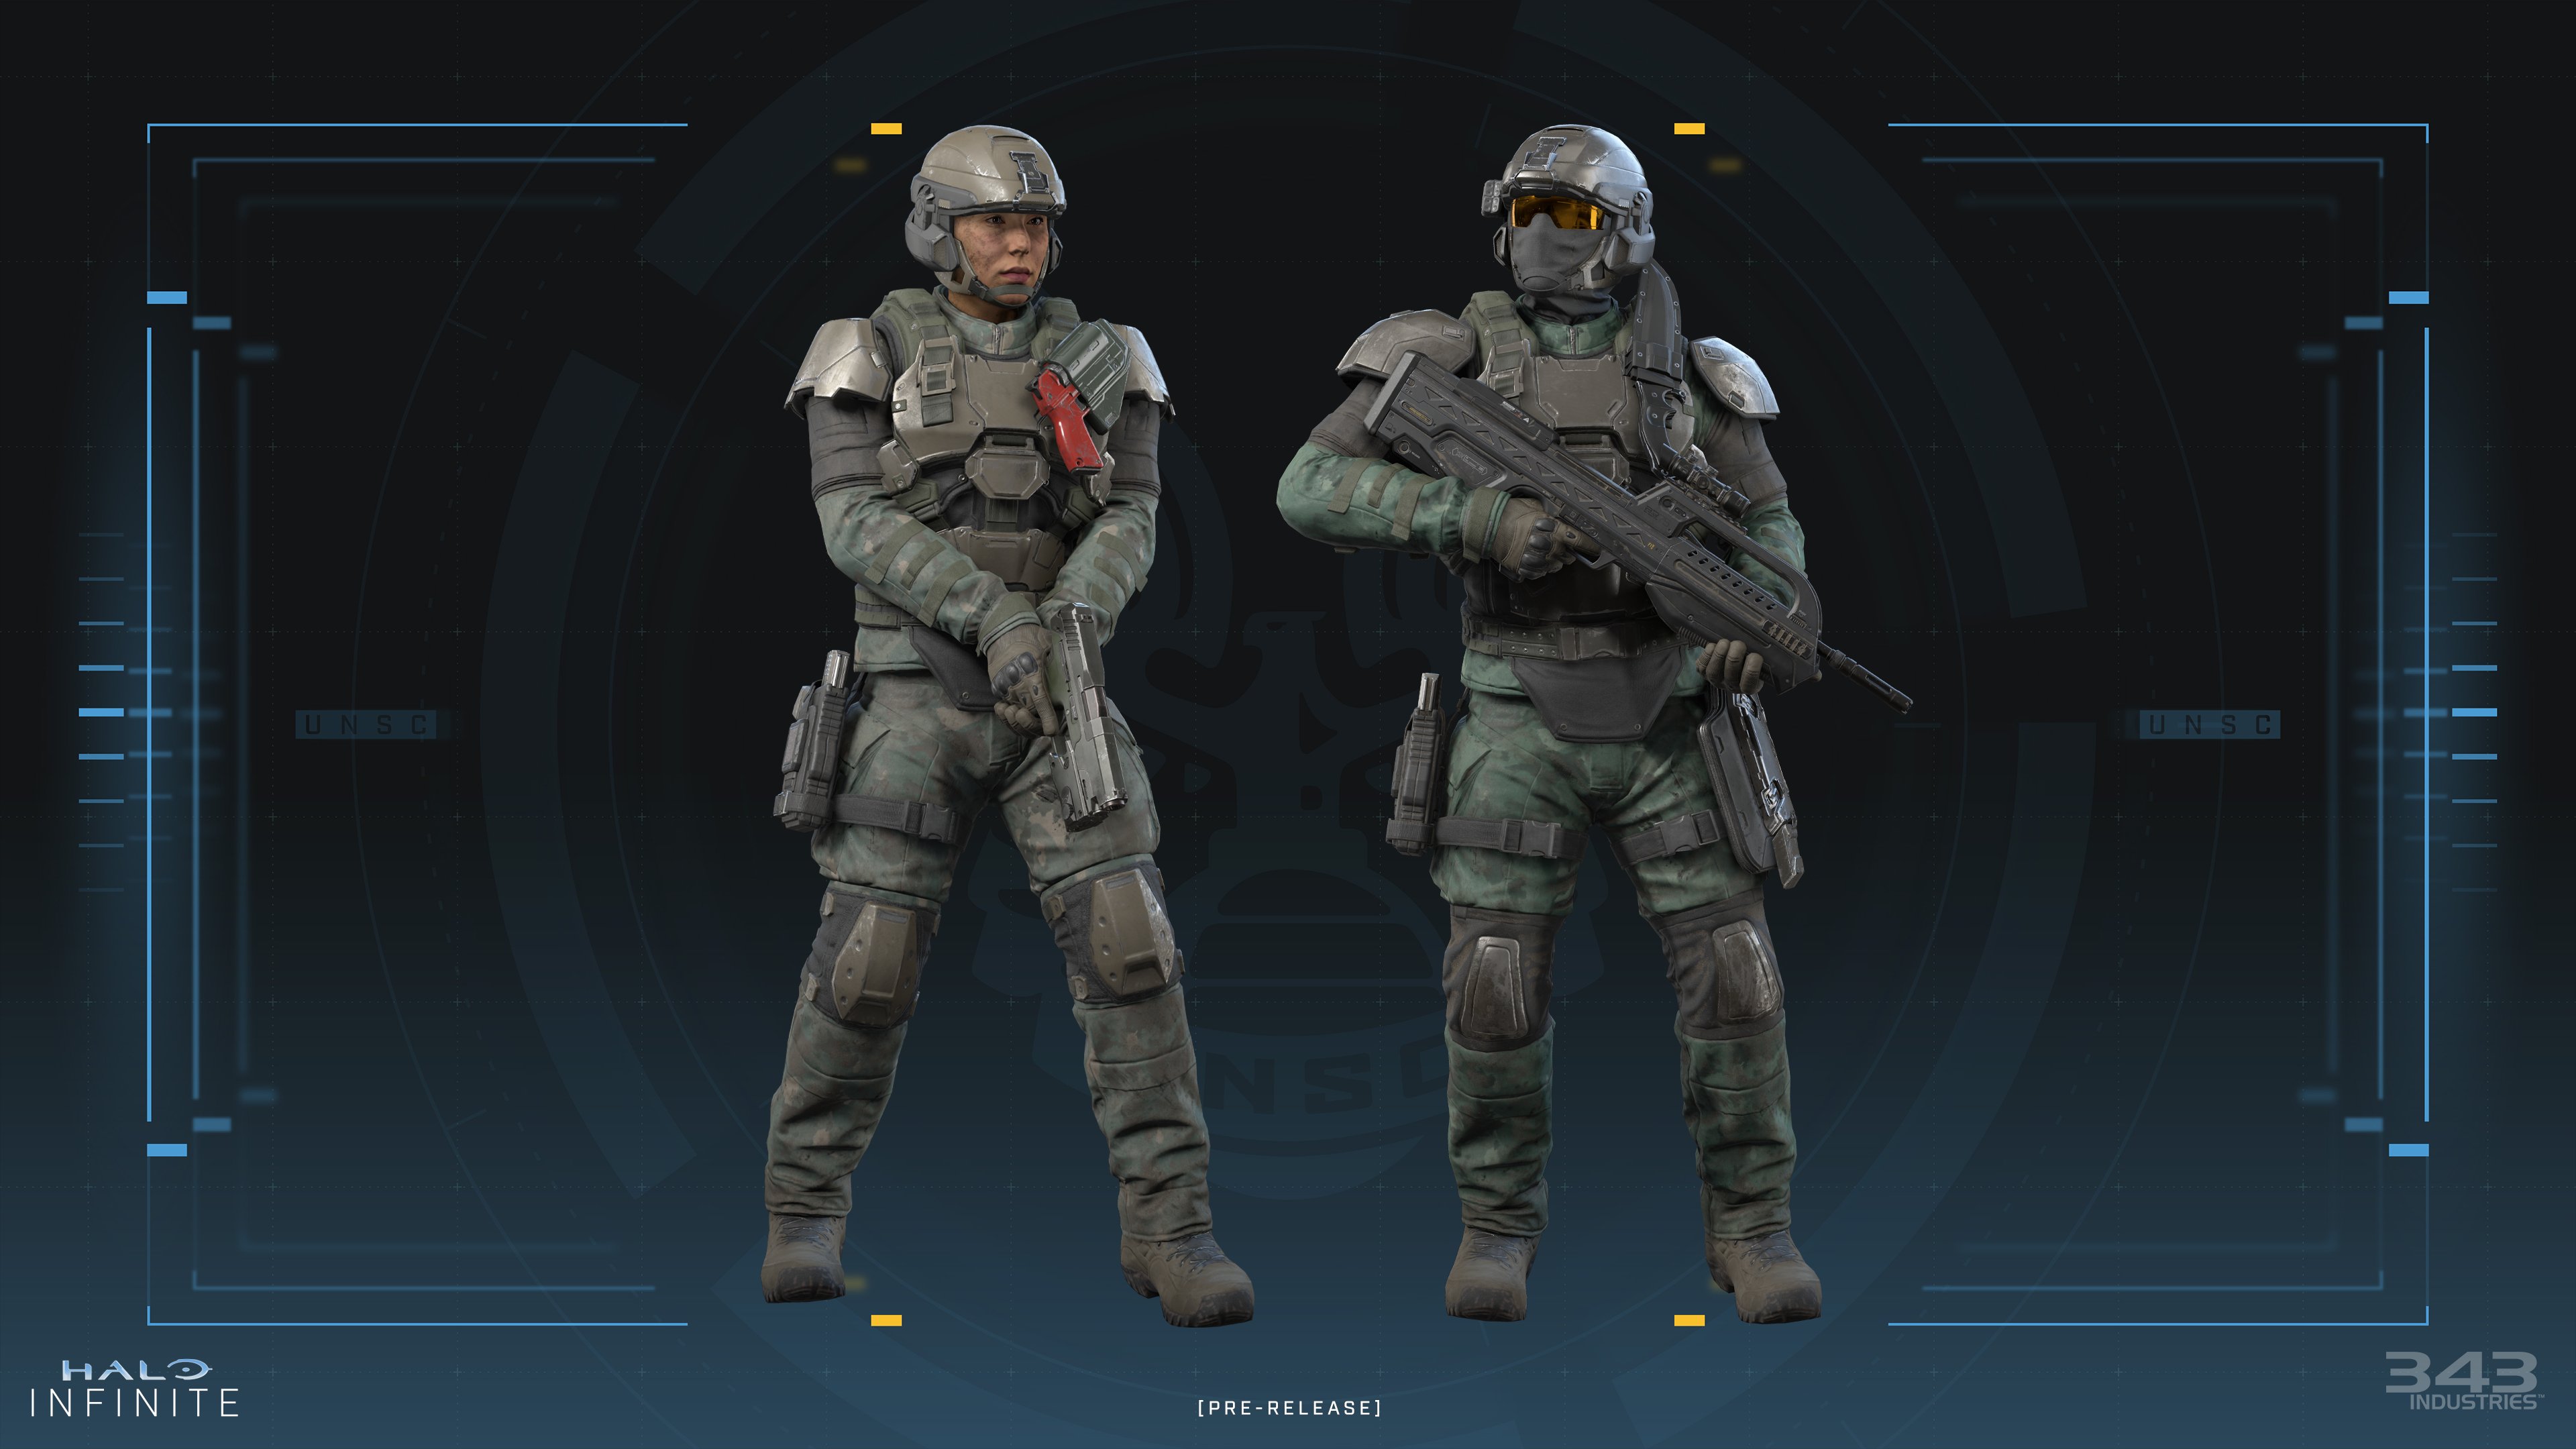 Marine Corps Gaming on X: Sound Off #Marines what do we think of the  new @Halo UNSC Marine uniforms? #HaloInfinite #HaloInfinitecampaign #Halo   / X